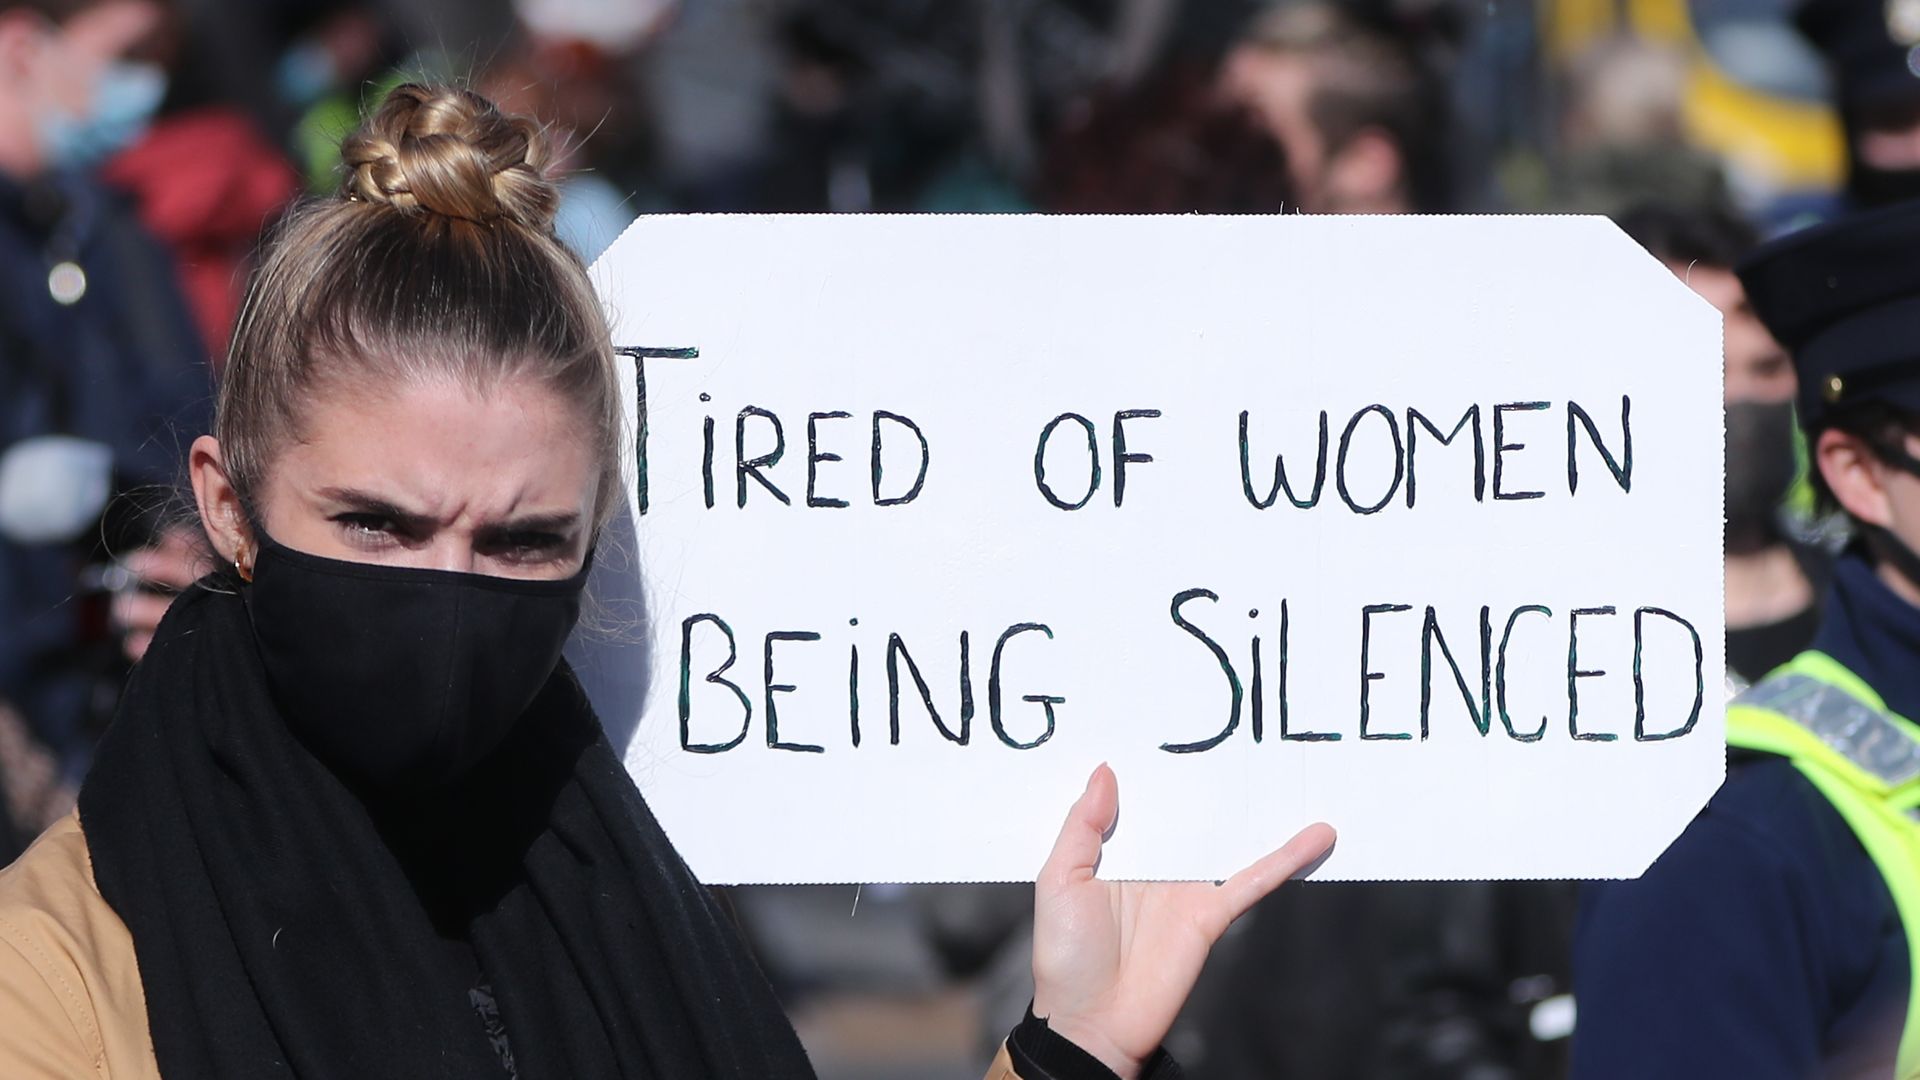 Demonstrators during a protest organised in remembrance of murdered Sarah Everard and in protest of continued violence against women - Credit: PA